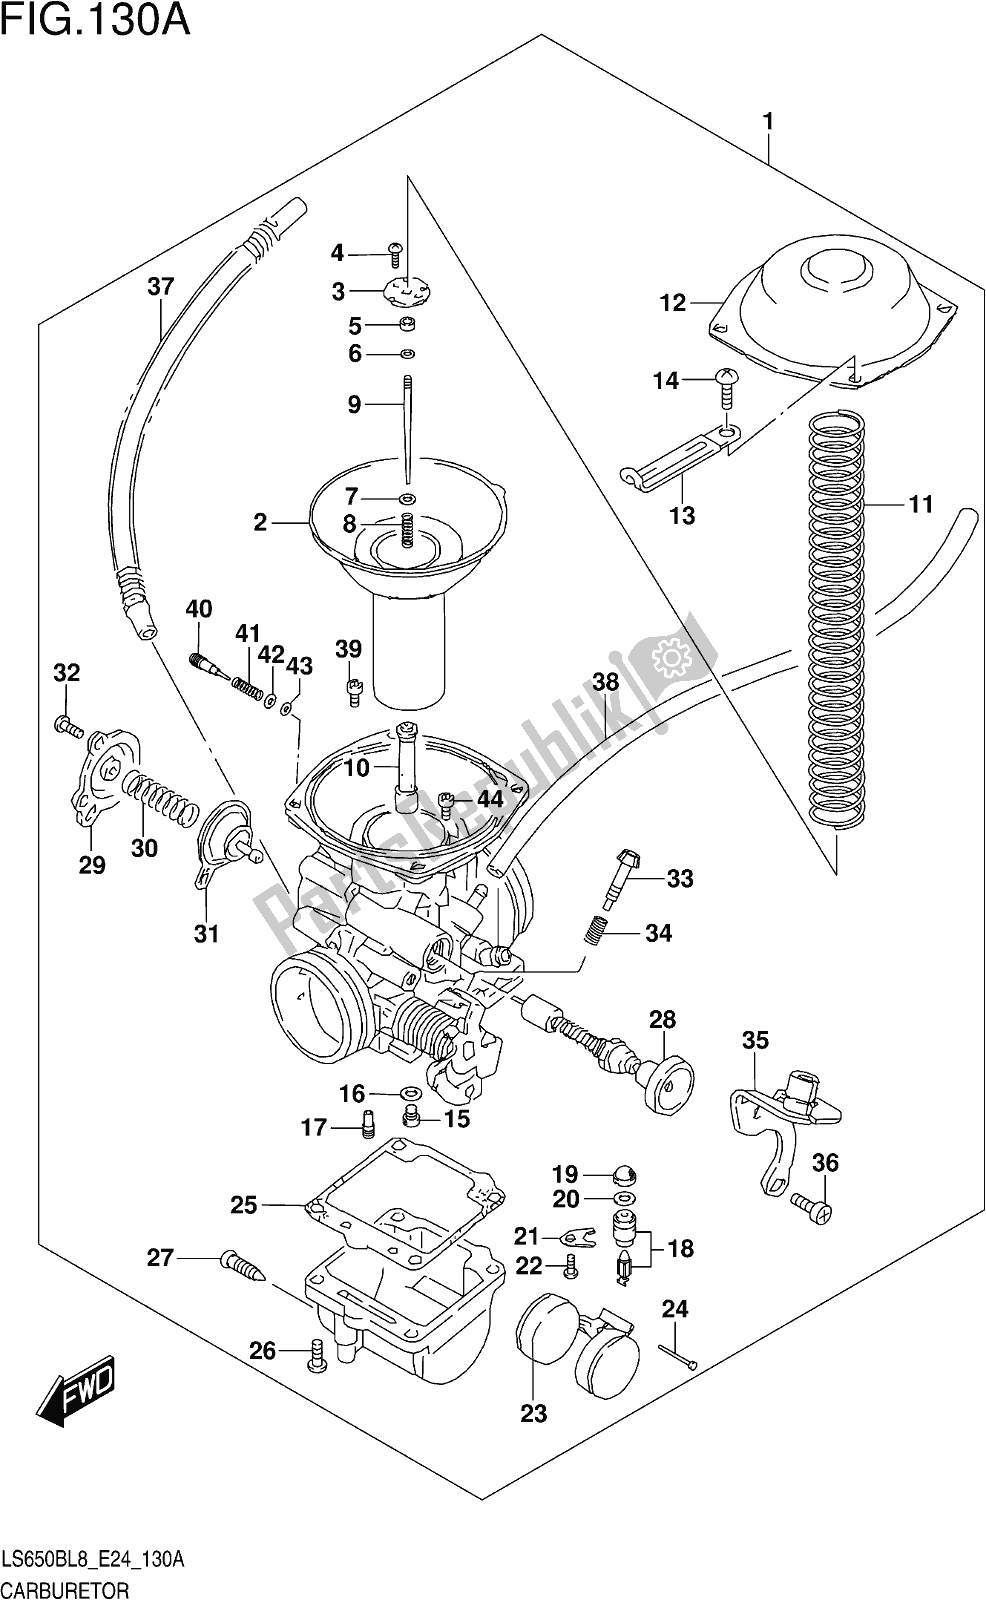 All parts for the Fig. 130a Carburetor of the Suzuki LS 650B 2018